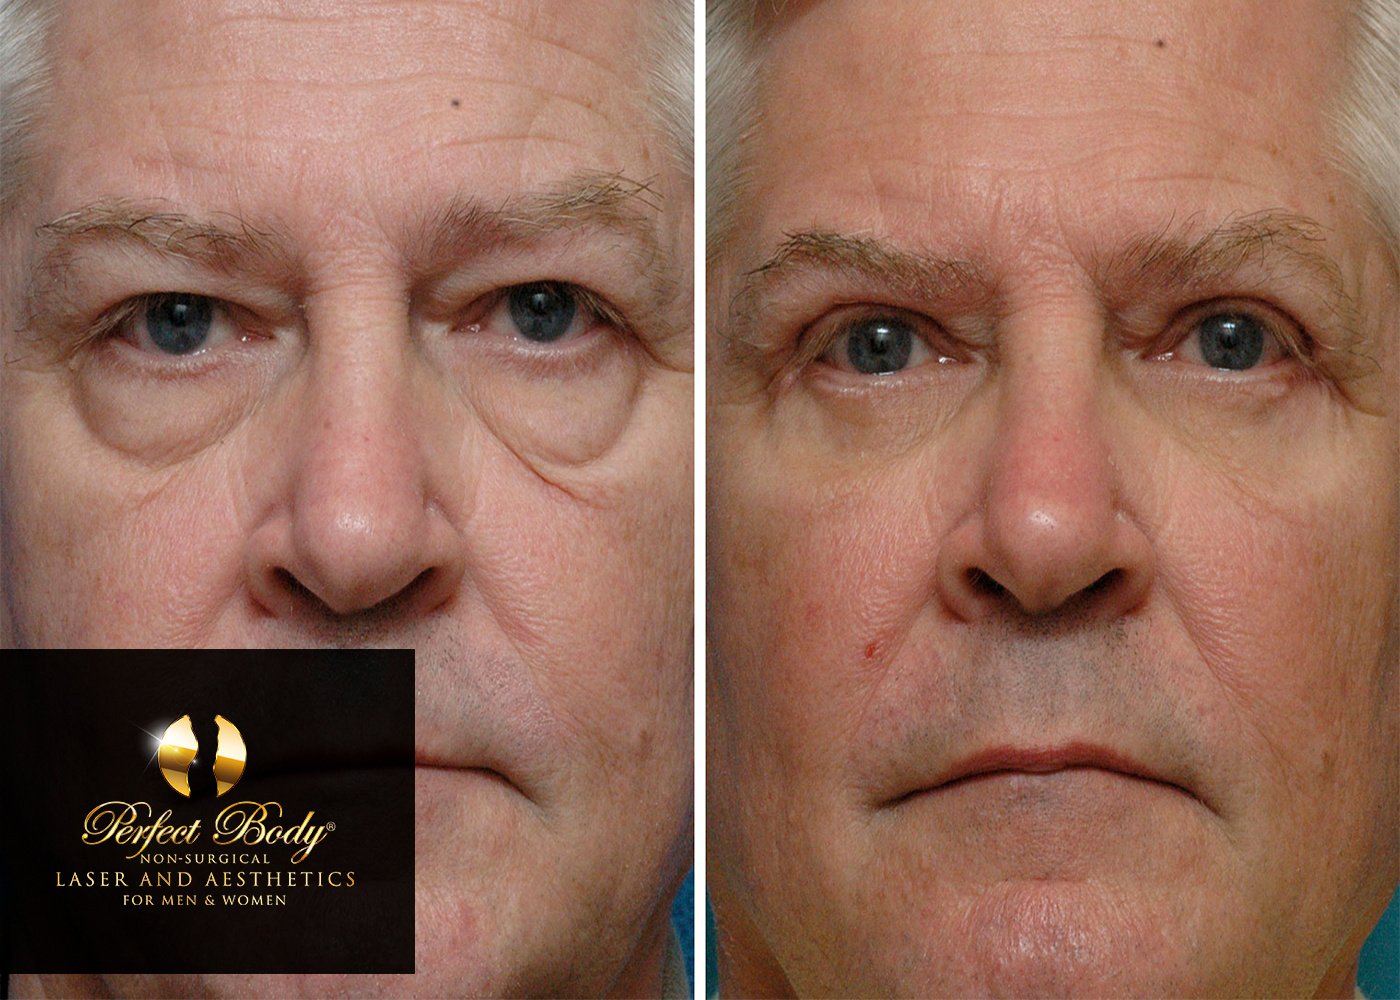 Ultherapy Laser Skin Tightening For The Face